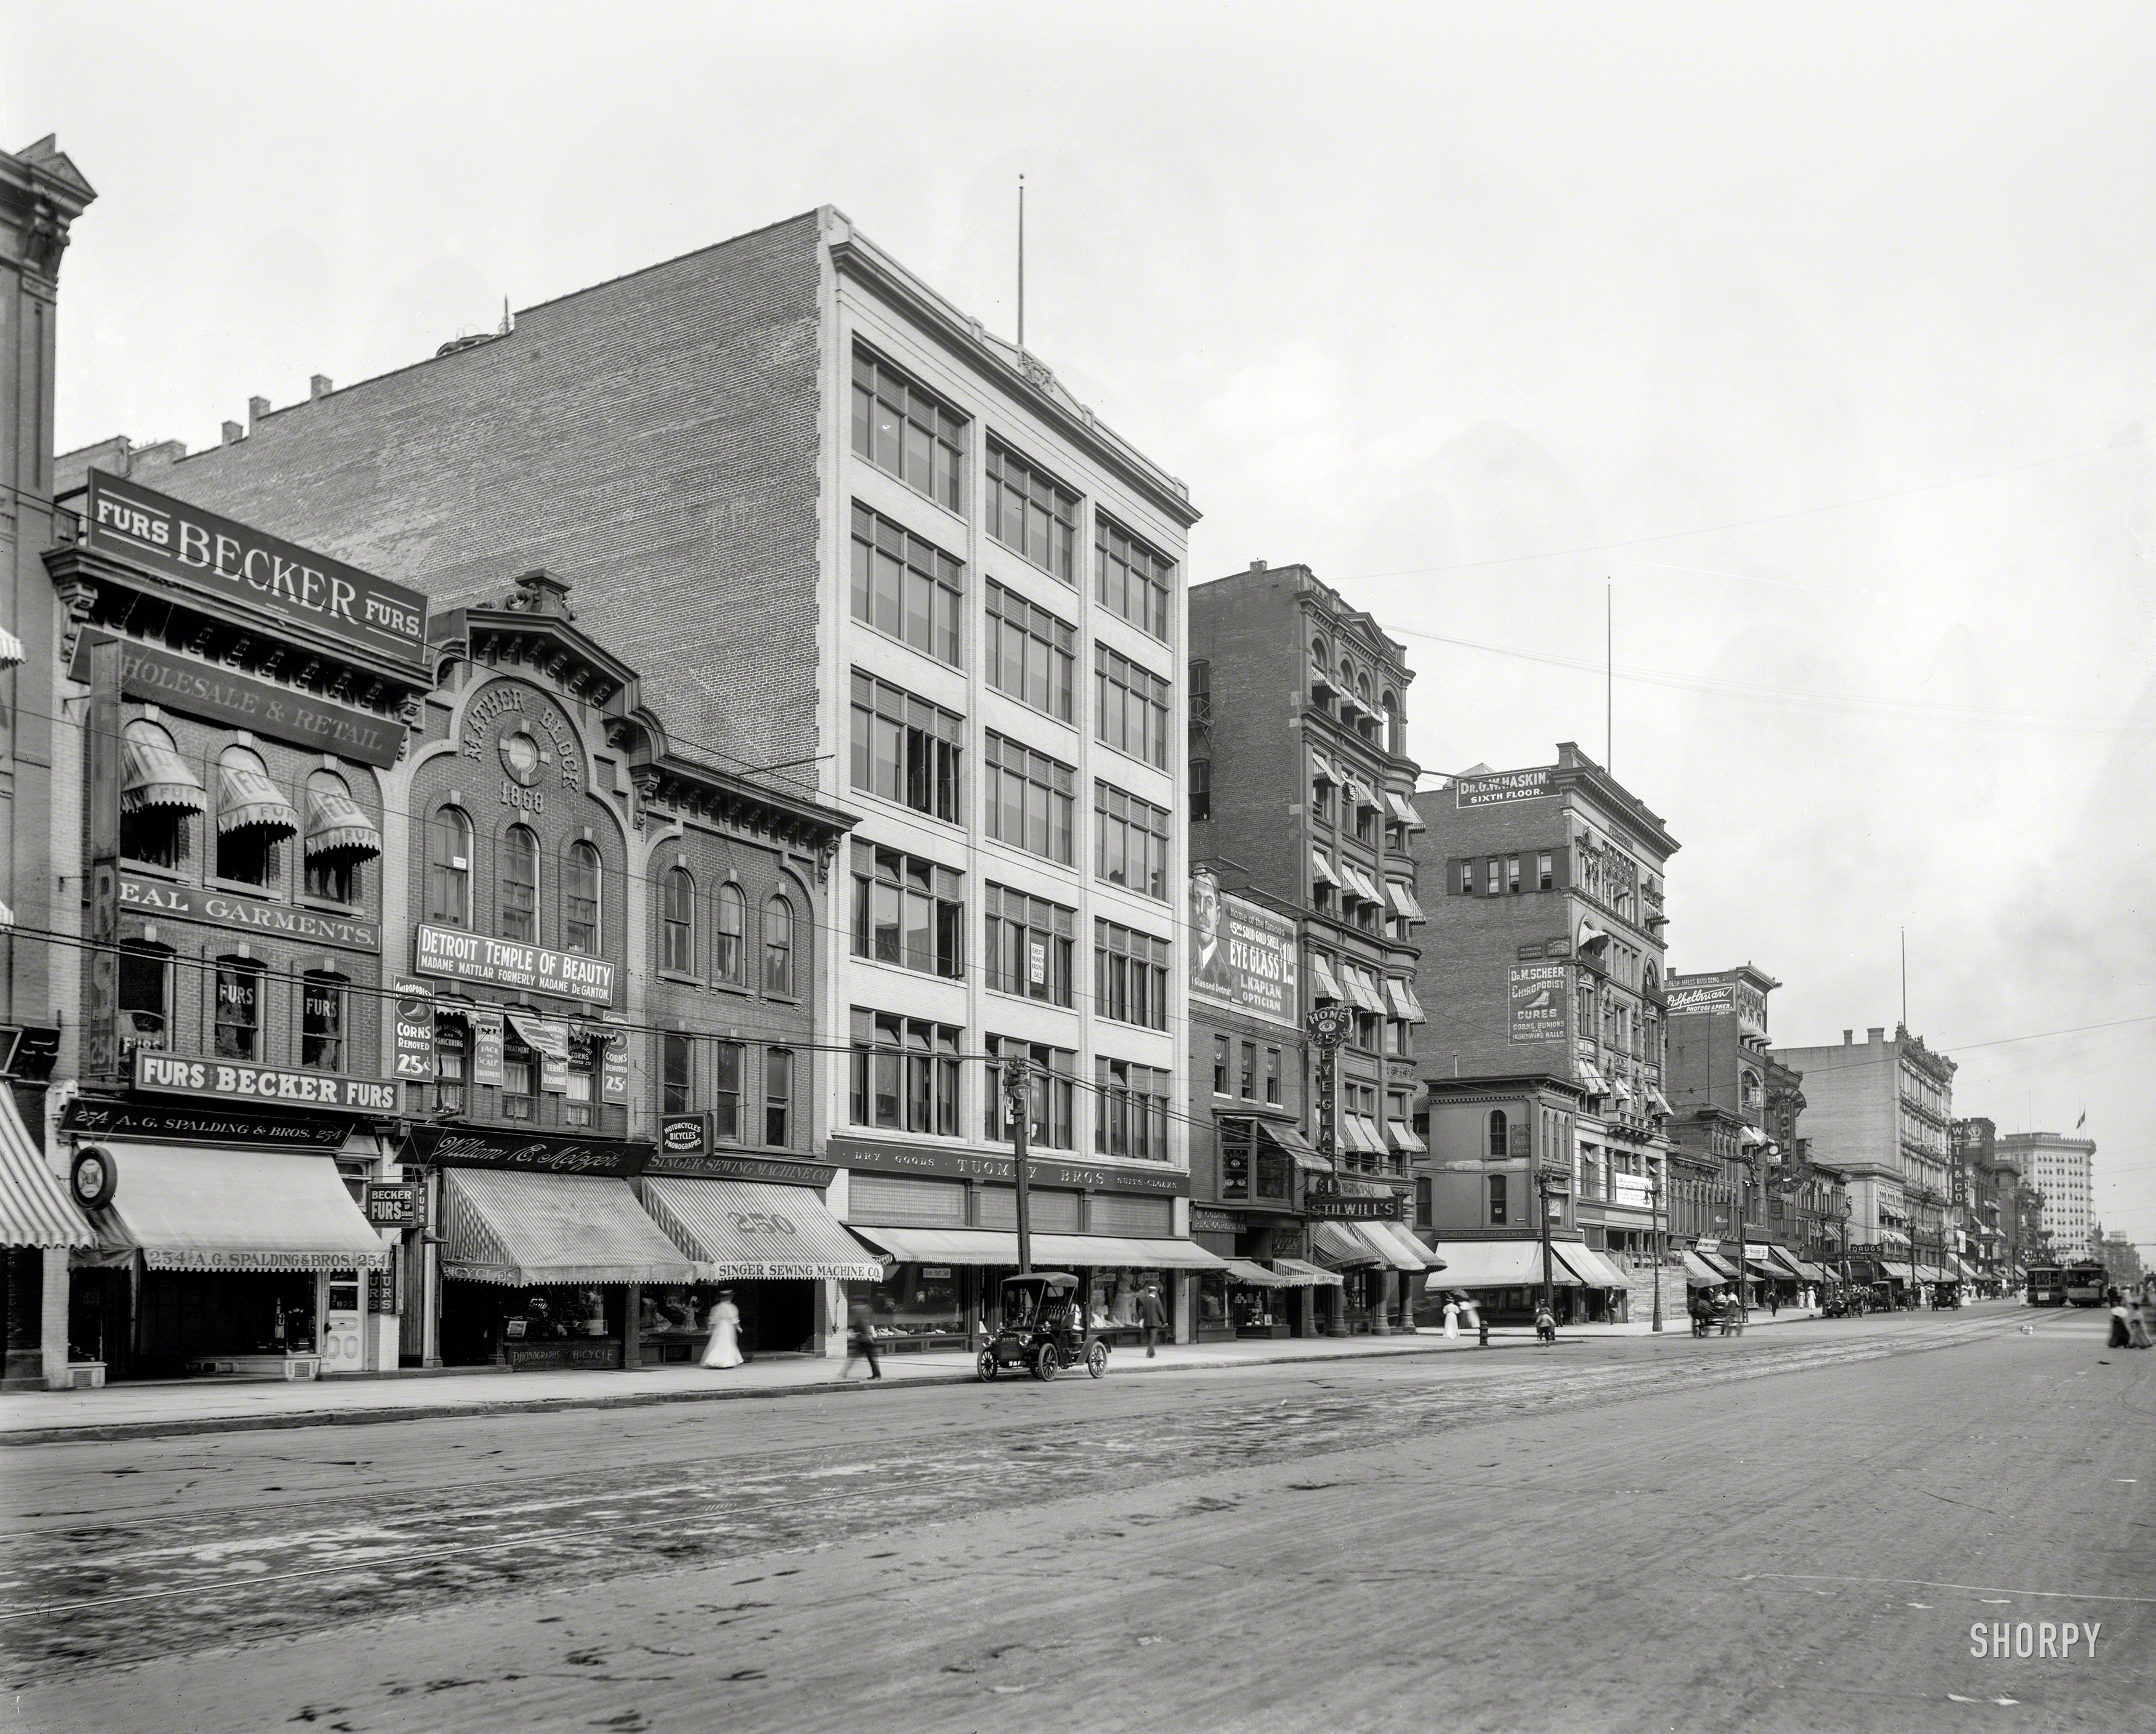 Detroit circa 1908. "Mather Block, Woodward Avenue." Where merchants vying for your trade include Madame Mattlar's Temple of Beauty ("Corns removed, 25¢"); William E. Metzger, dealer in "Motorcycles Bicycles Phonographs"; an outpost of the Singer Sewing Machine Co.; Tuomy Bros. (suits and cloaks) and the eyeball-bedizened offices of L. Kaplan Optician ("I Glassed Detroit"). 8x10 inch dry plate glass negative, Detroit Publishing Company. View full size.